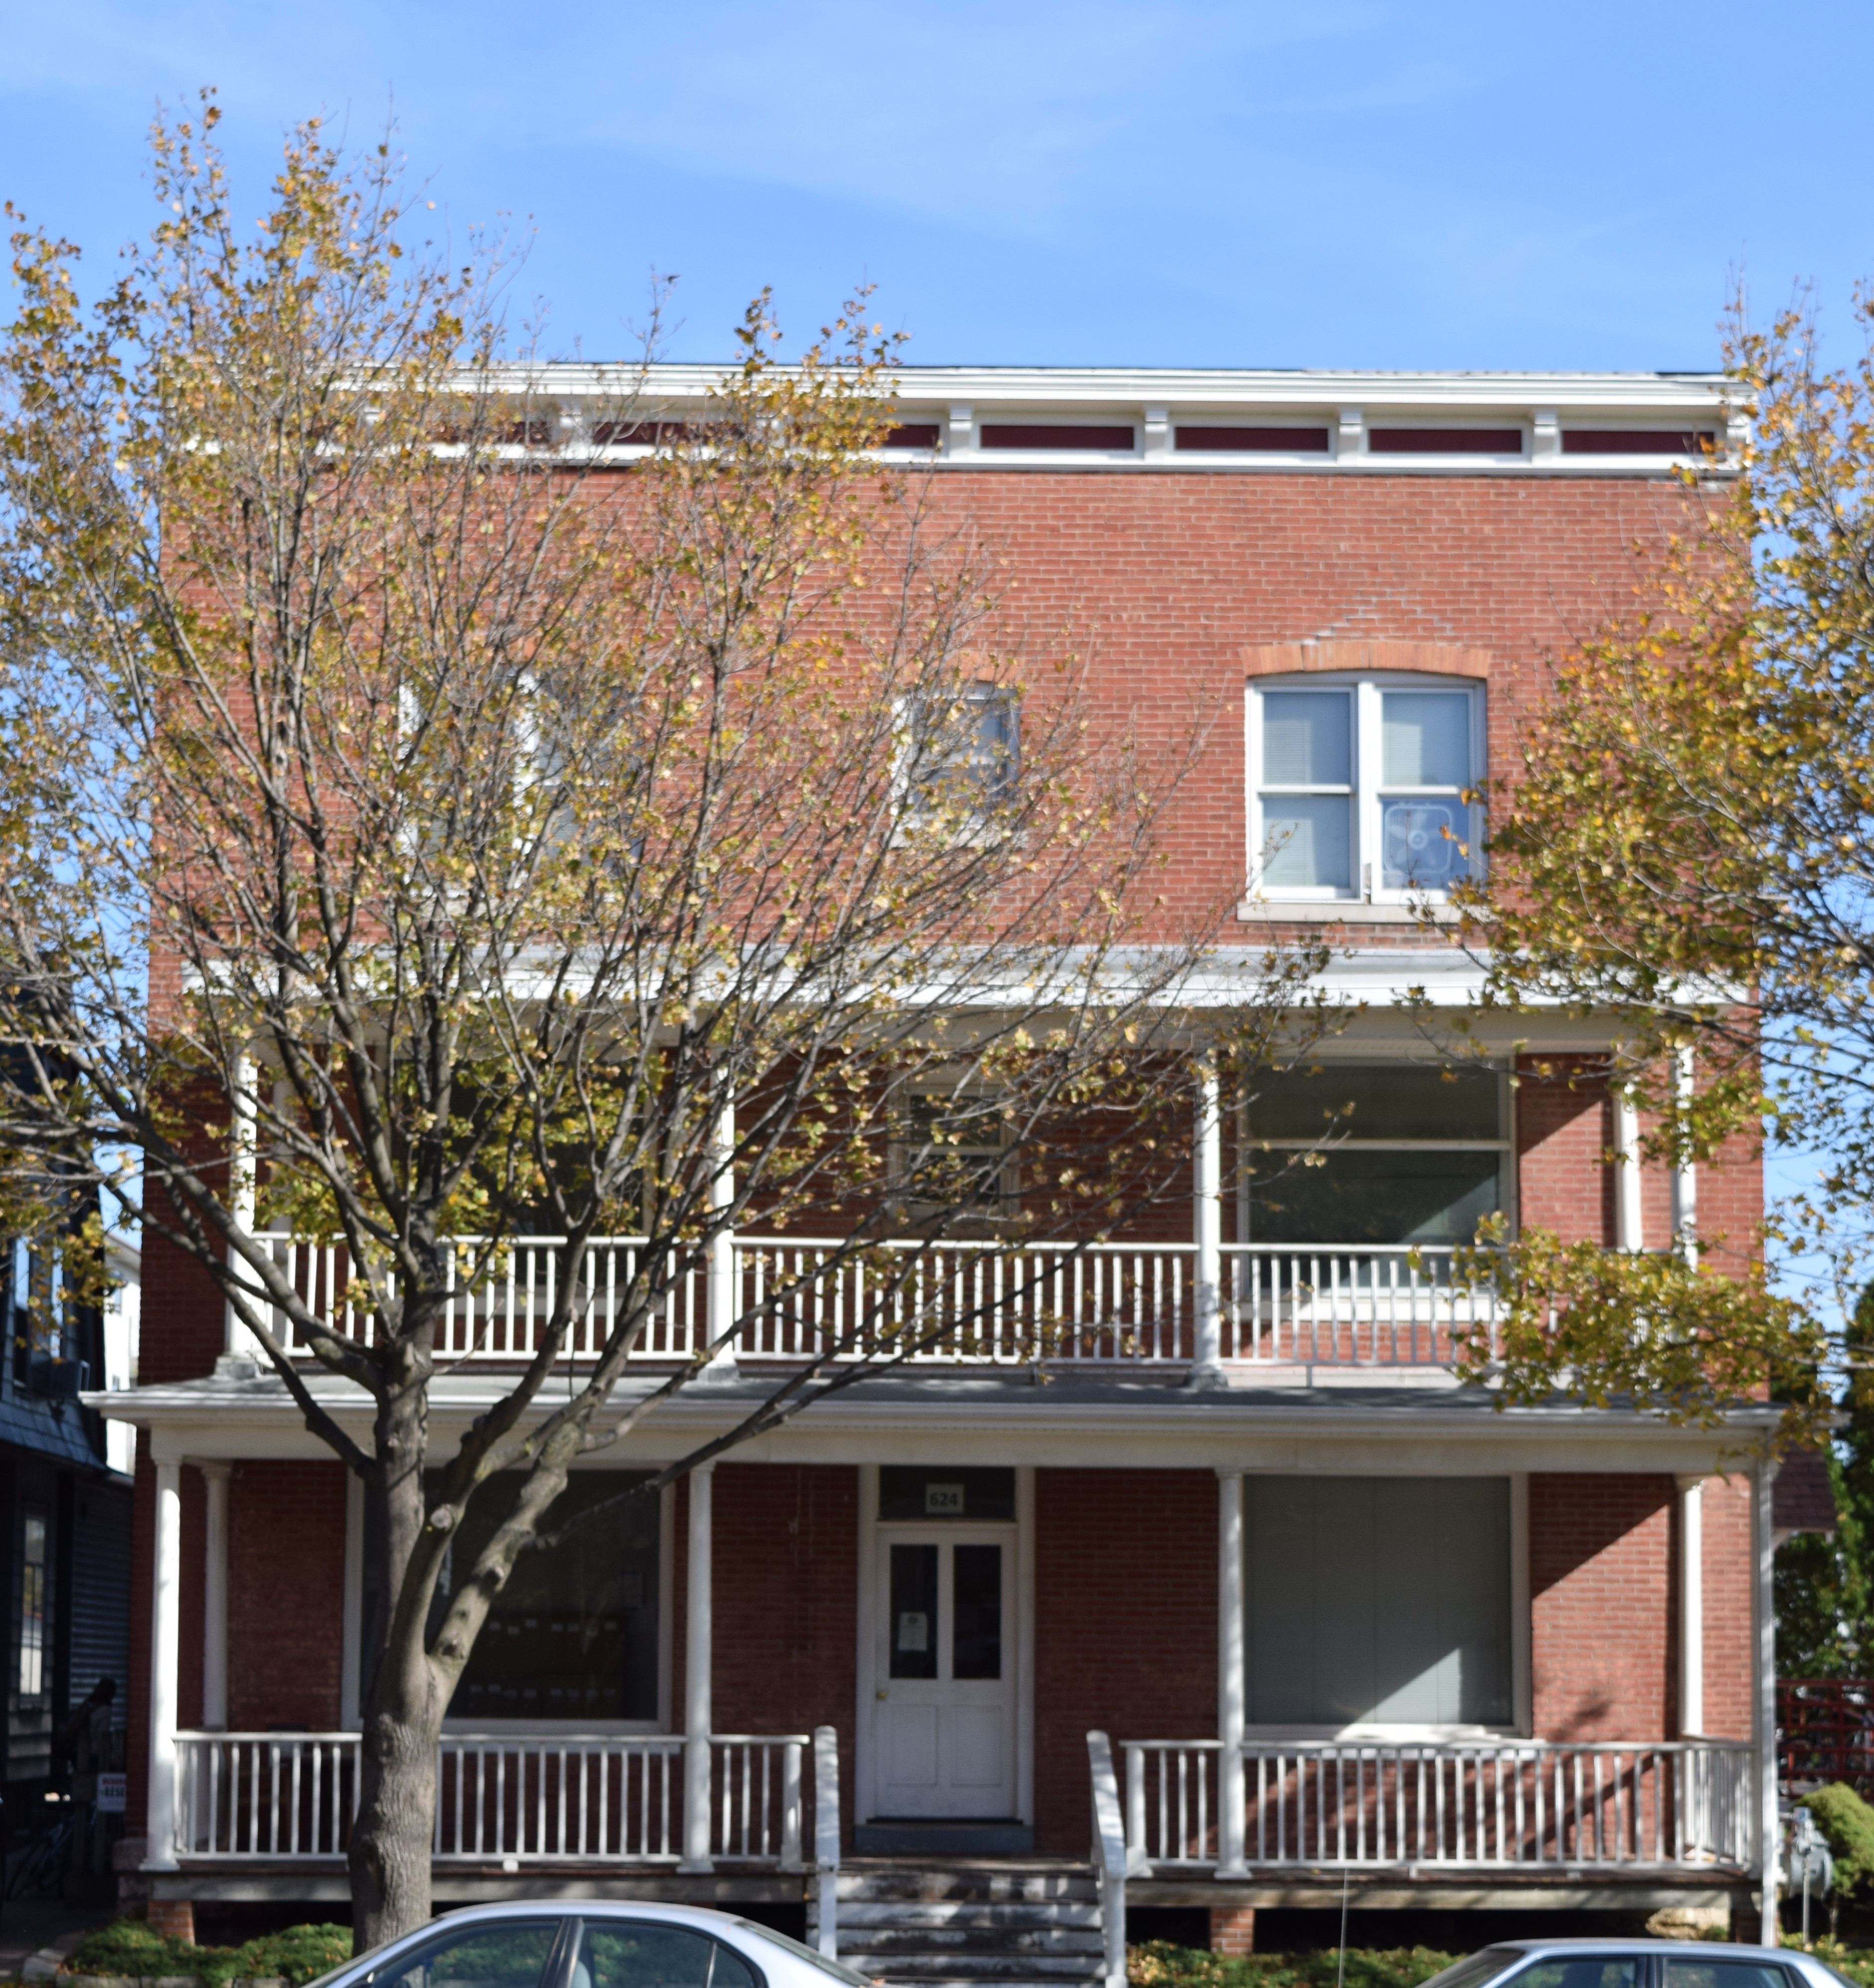 624 S. Clinton St. #2- 2 Bedroom Available NOW and August 2022-July 2023